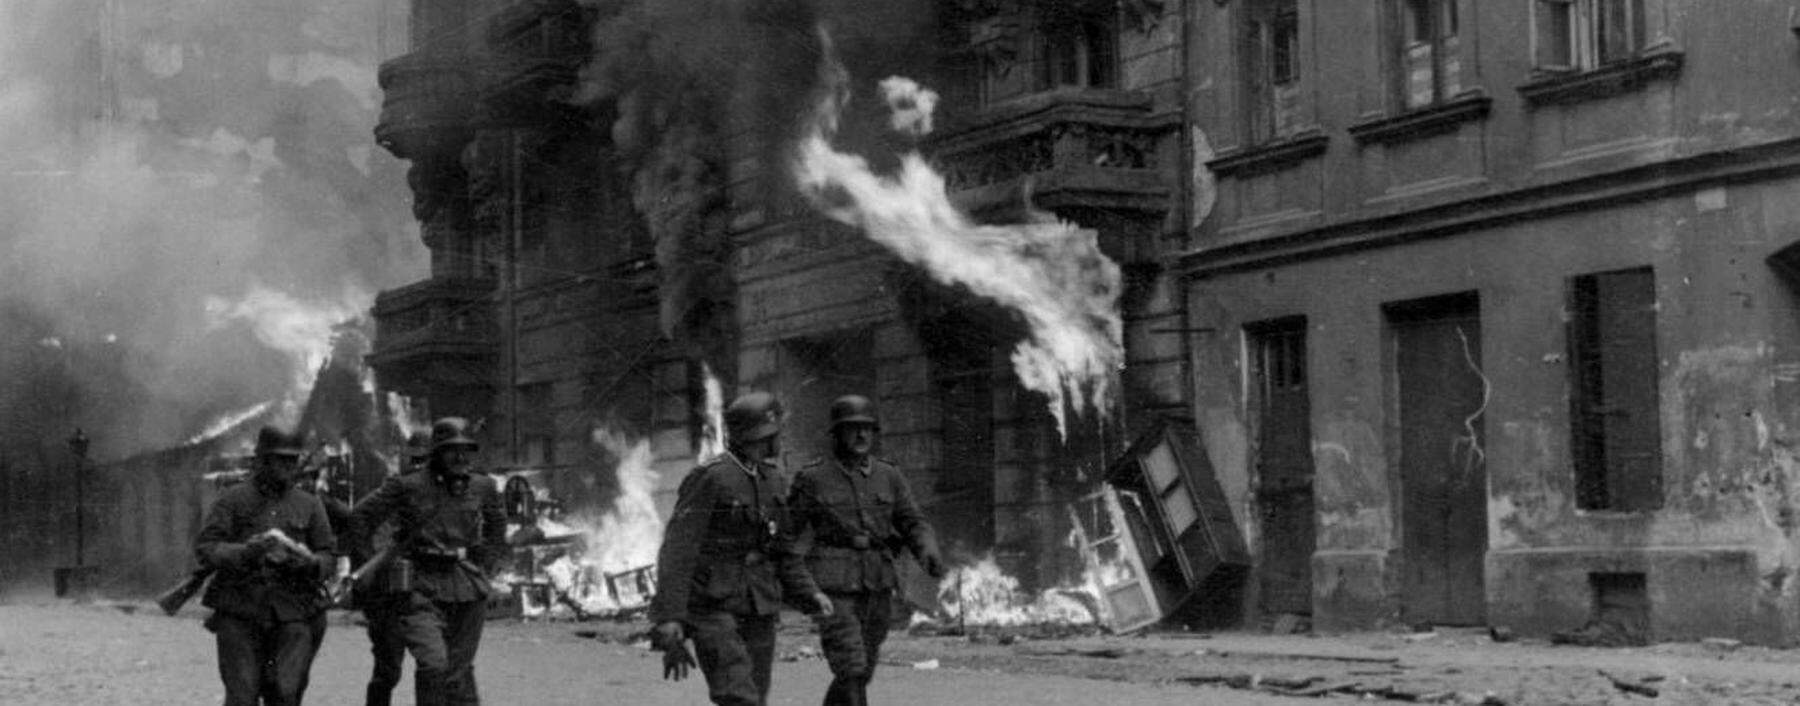 Photograph of a patrol of SS men on Nowolipie Street during the Warsaw Ghetto Uprising Dated 1943 W